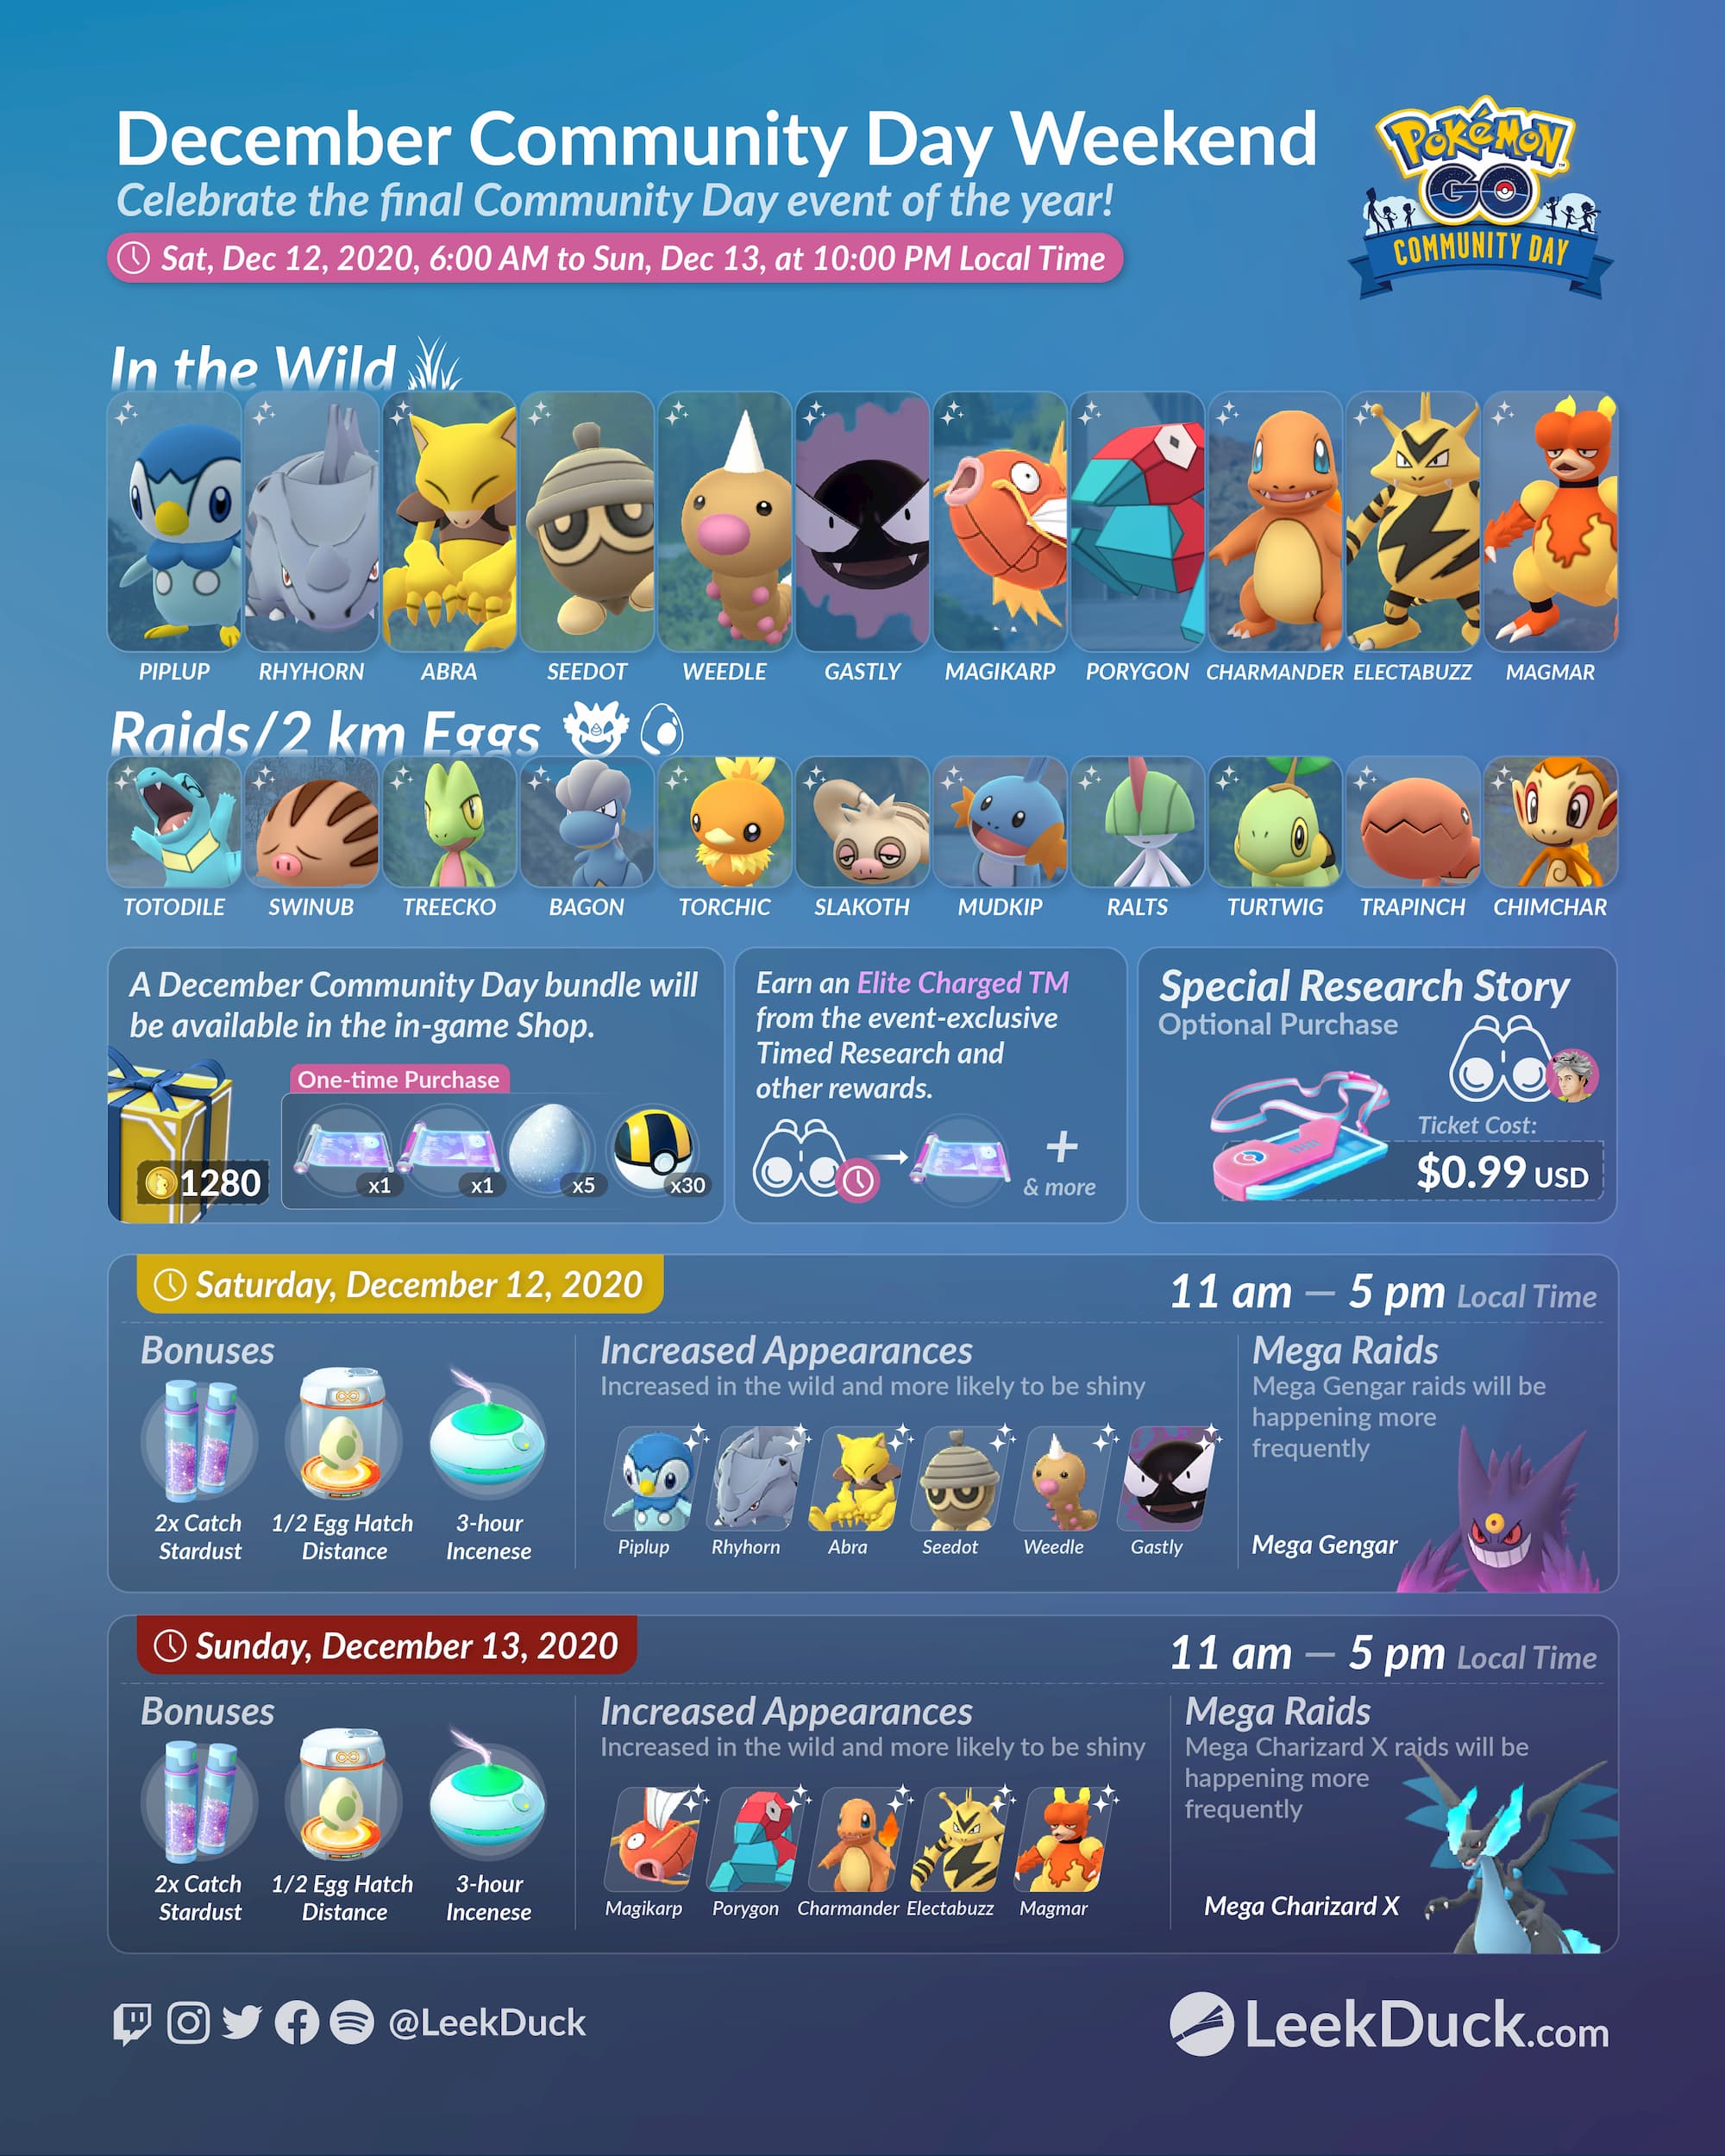 December Community Day Weekend Leek Duck Pokemon Go News And Resources